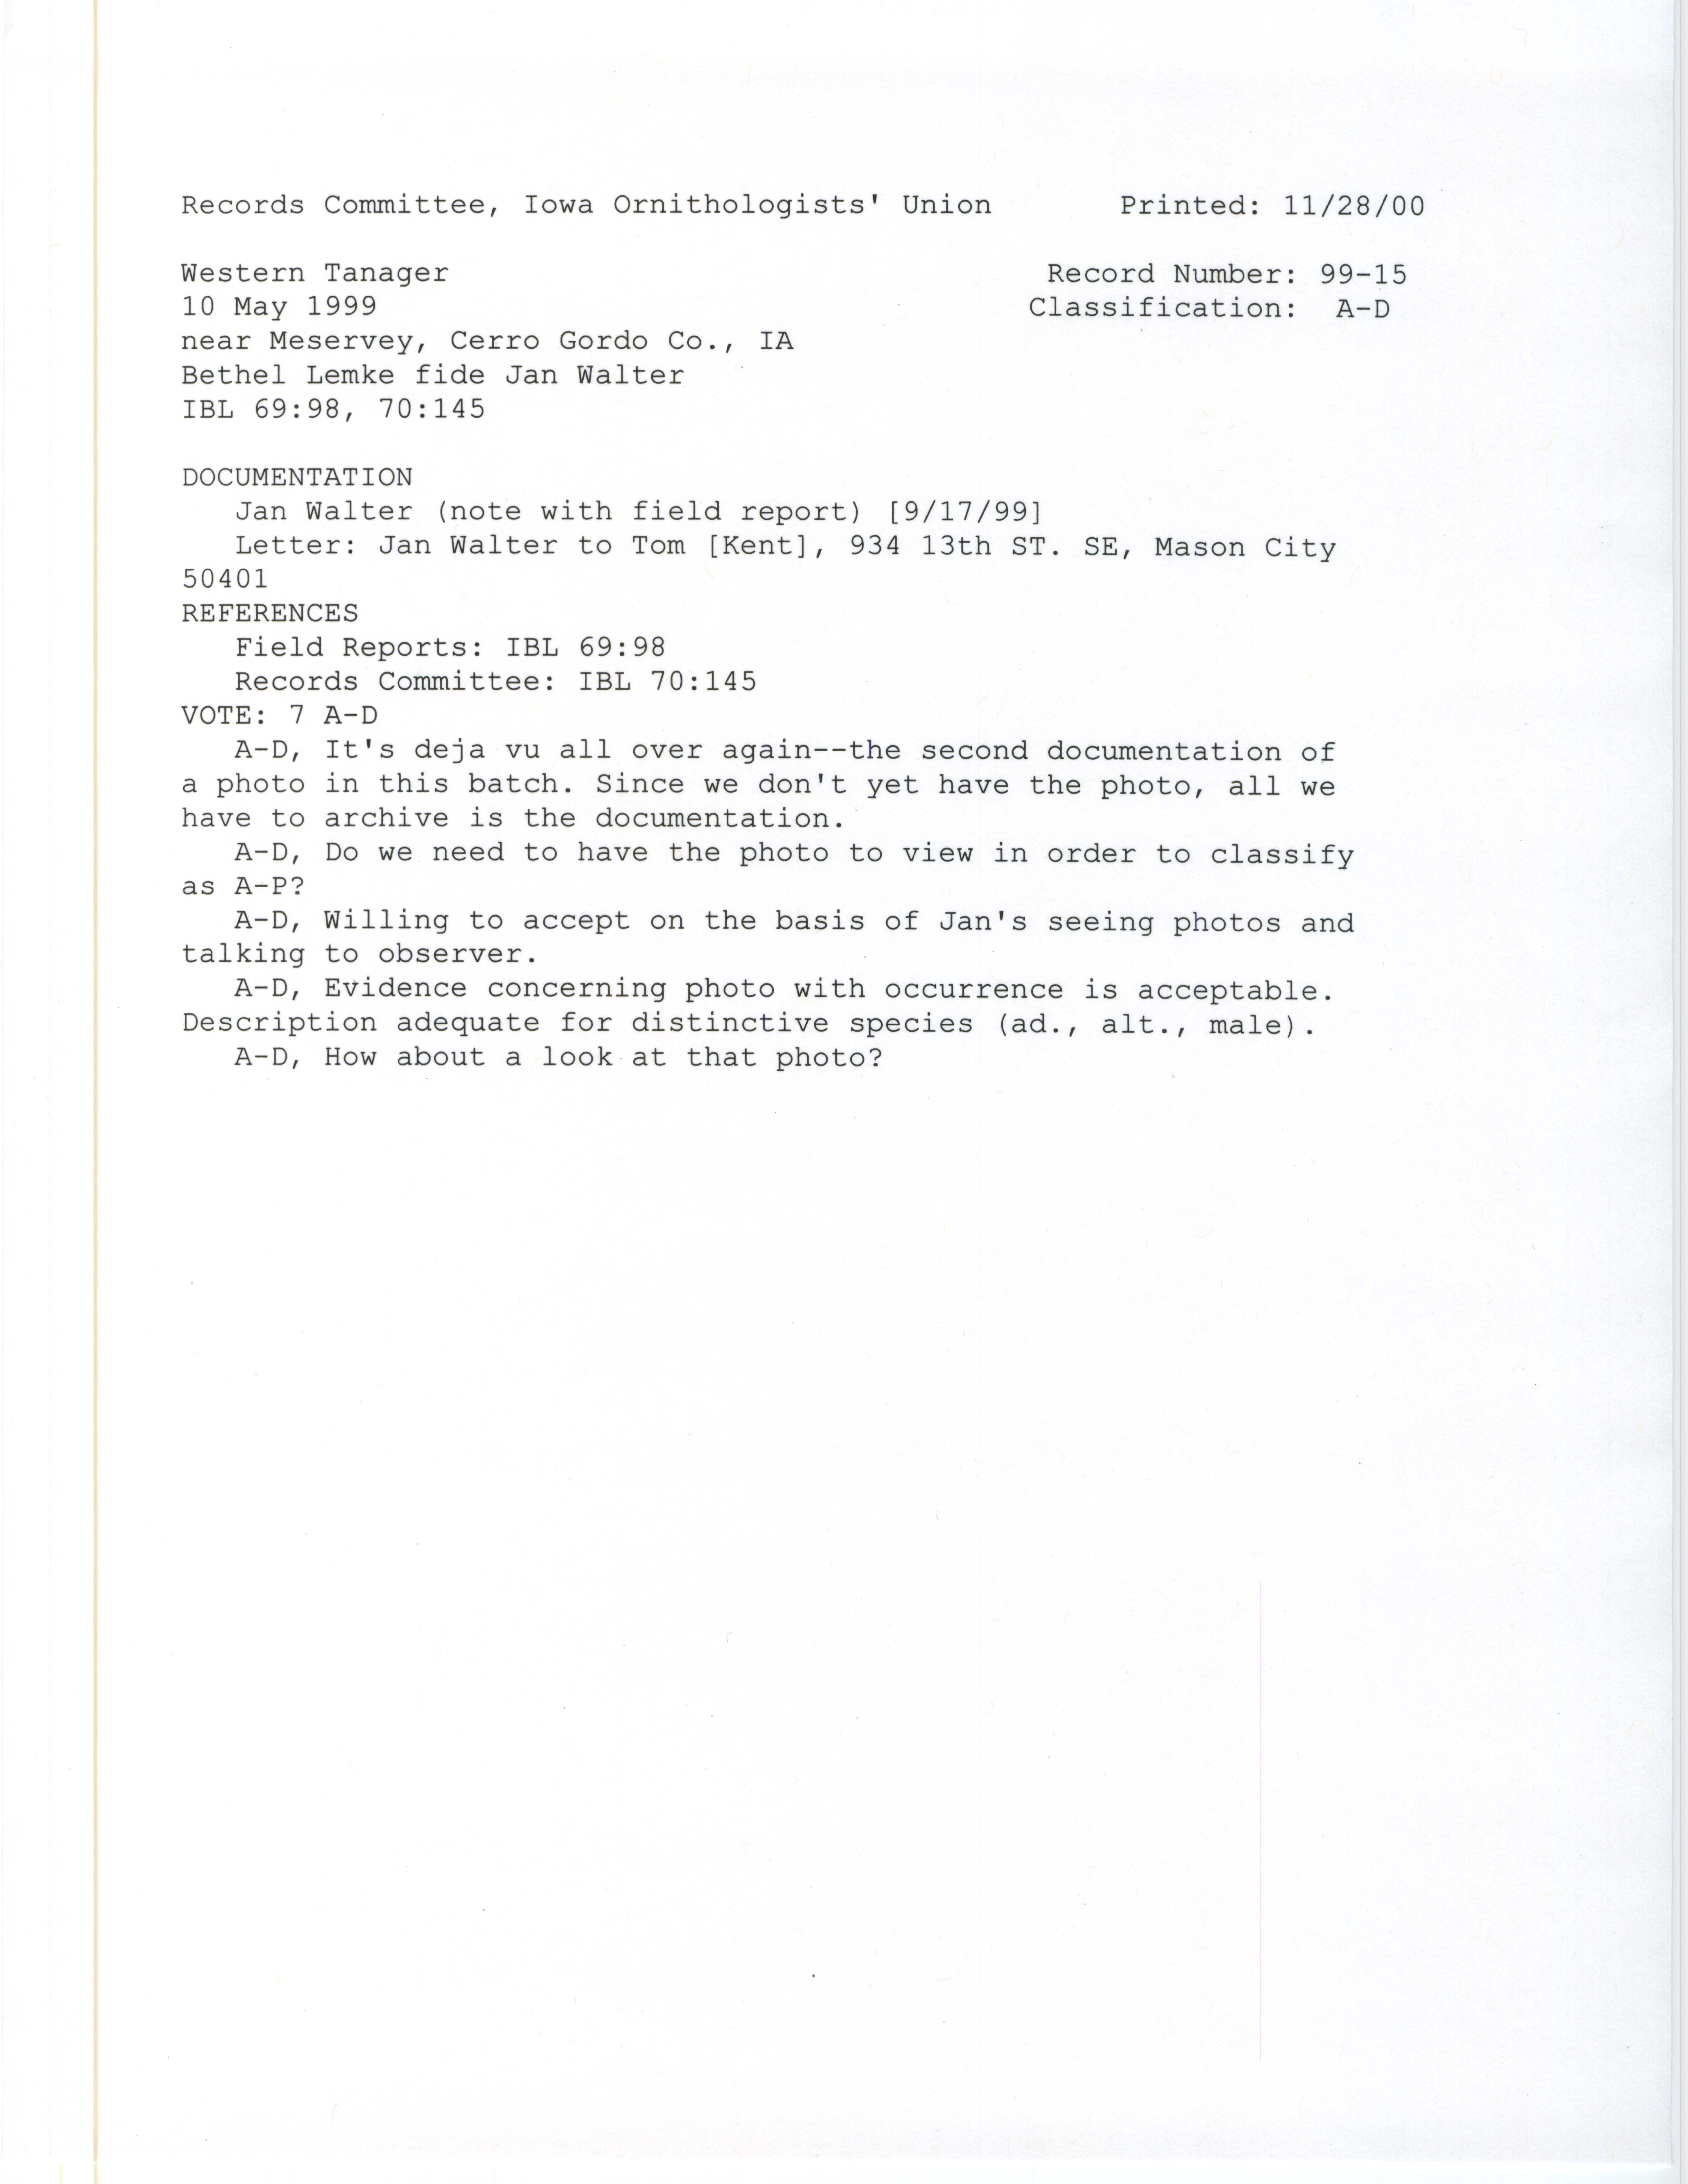 Records Committee review for rare bird sighting for Western Tanager near Meservey in 1999